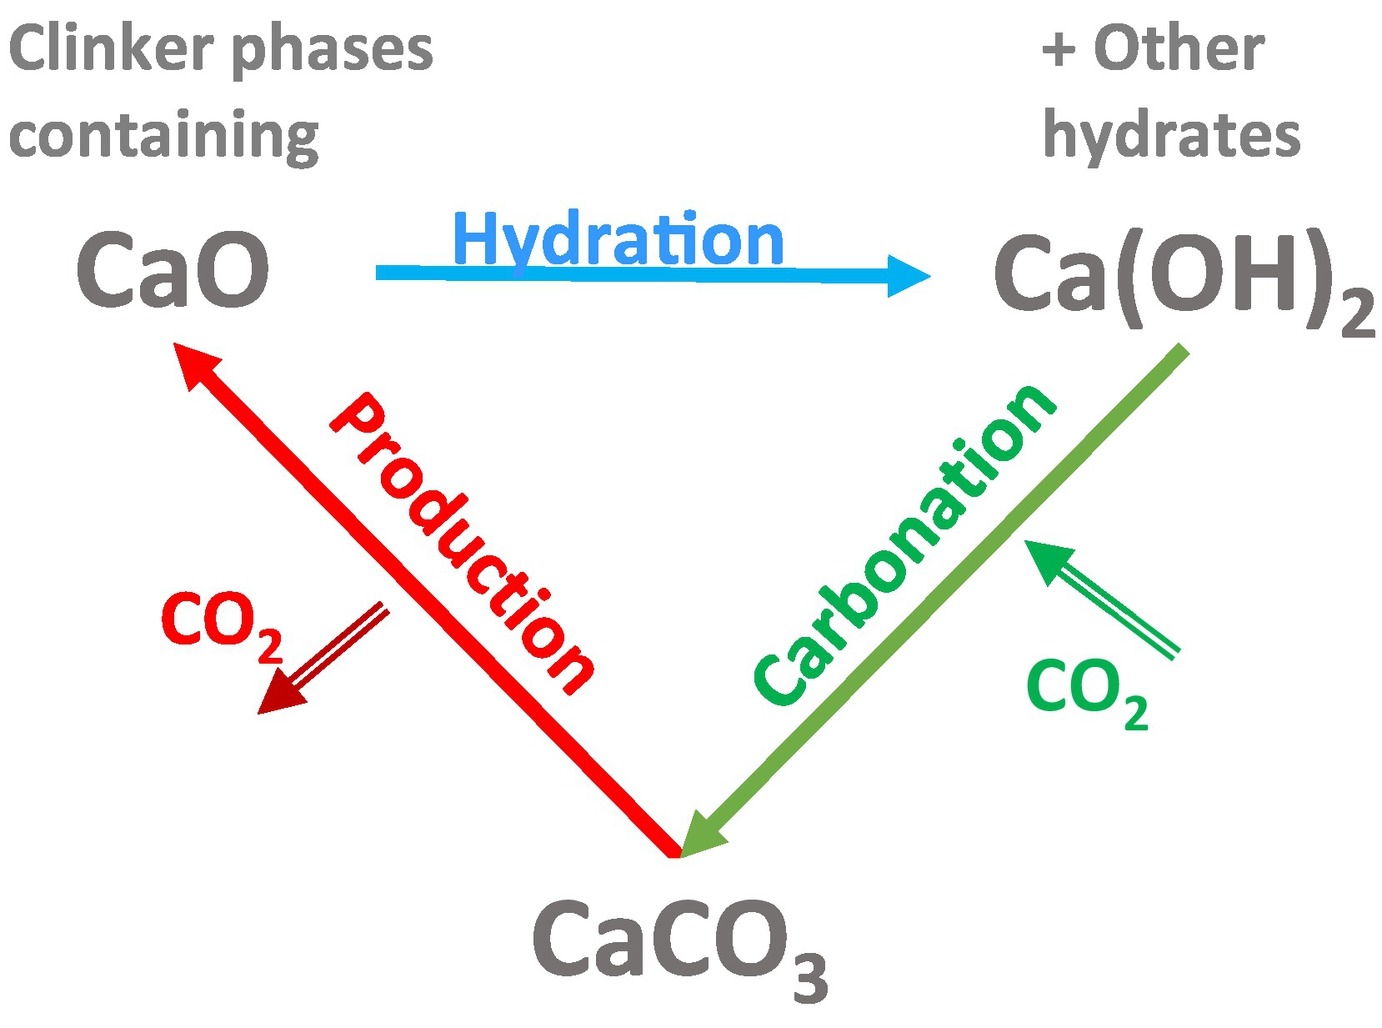 Diagram showing a triangle of reactions CaCO3 -> CaO -> Ca(OH)2 -> CaCO3